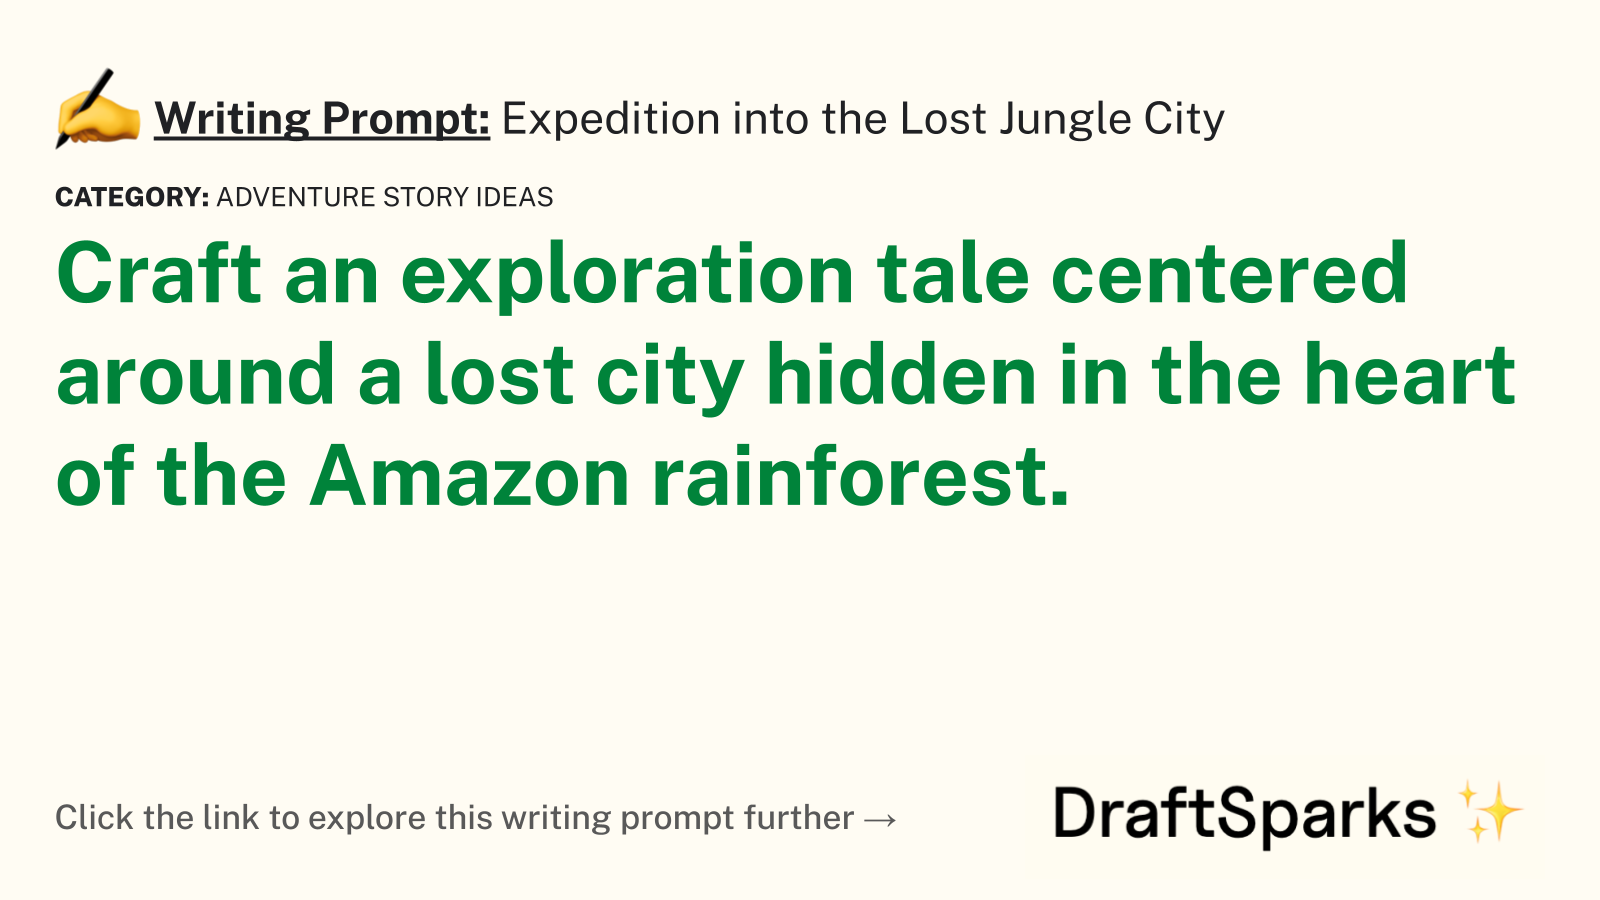 Expedition into the Lost Jungle City